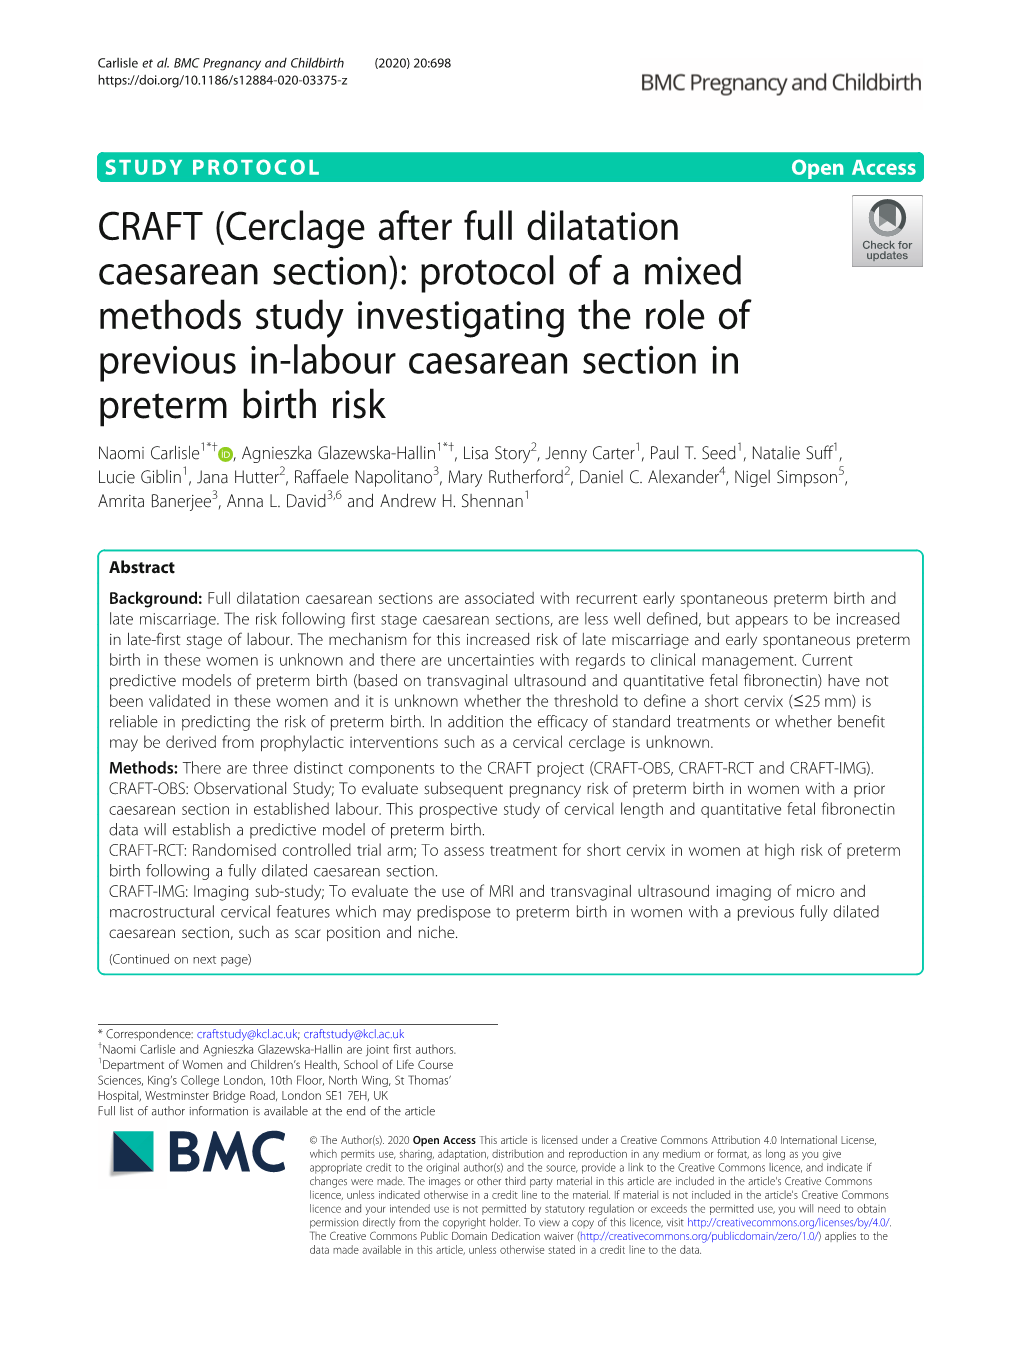 CRAFT (Cerclage After Full Dilatation Caesarean Section): Protocol of A